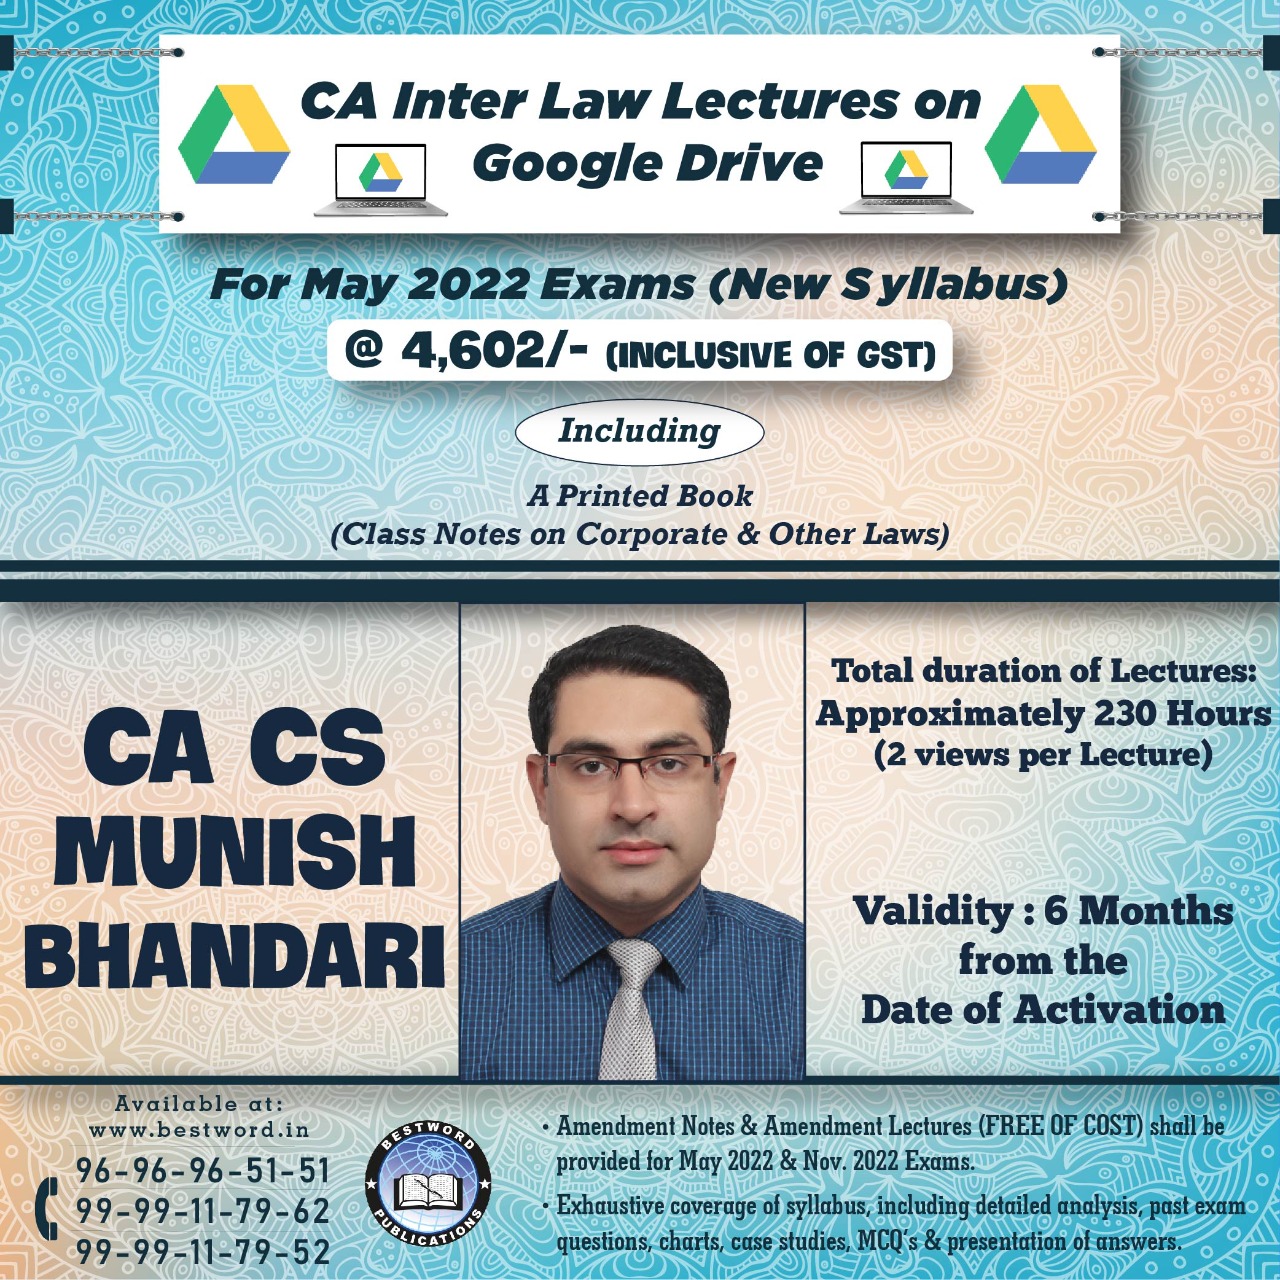 google-drive-lectures-for-ca-inter-law-–-by-ca-cs-munish-bhandari---for-may-22-exams-(corporate-and-other-laws---new-syllabus)-(old-recordings)